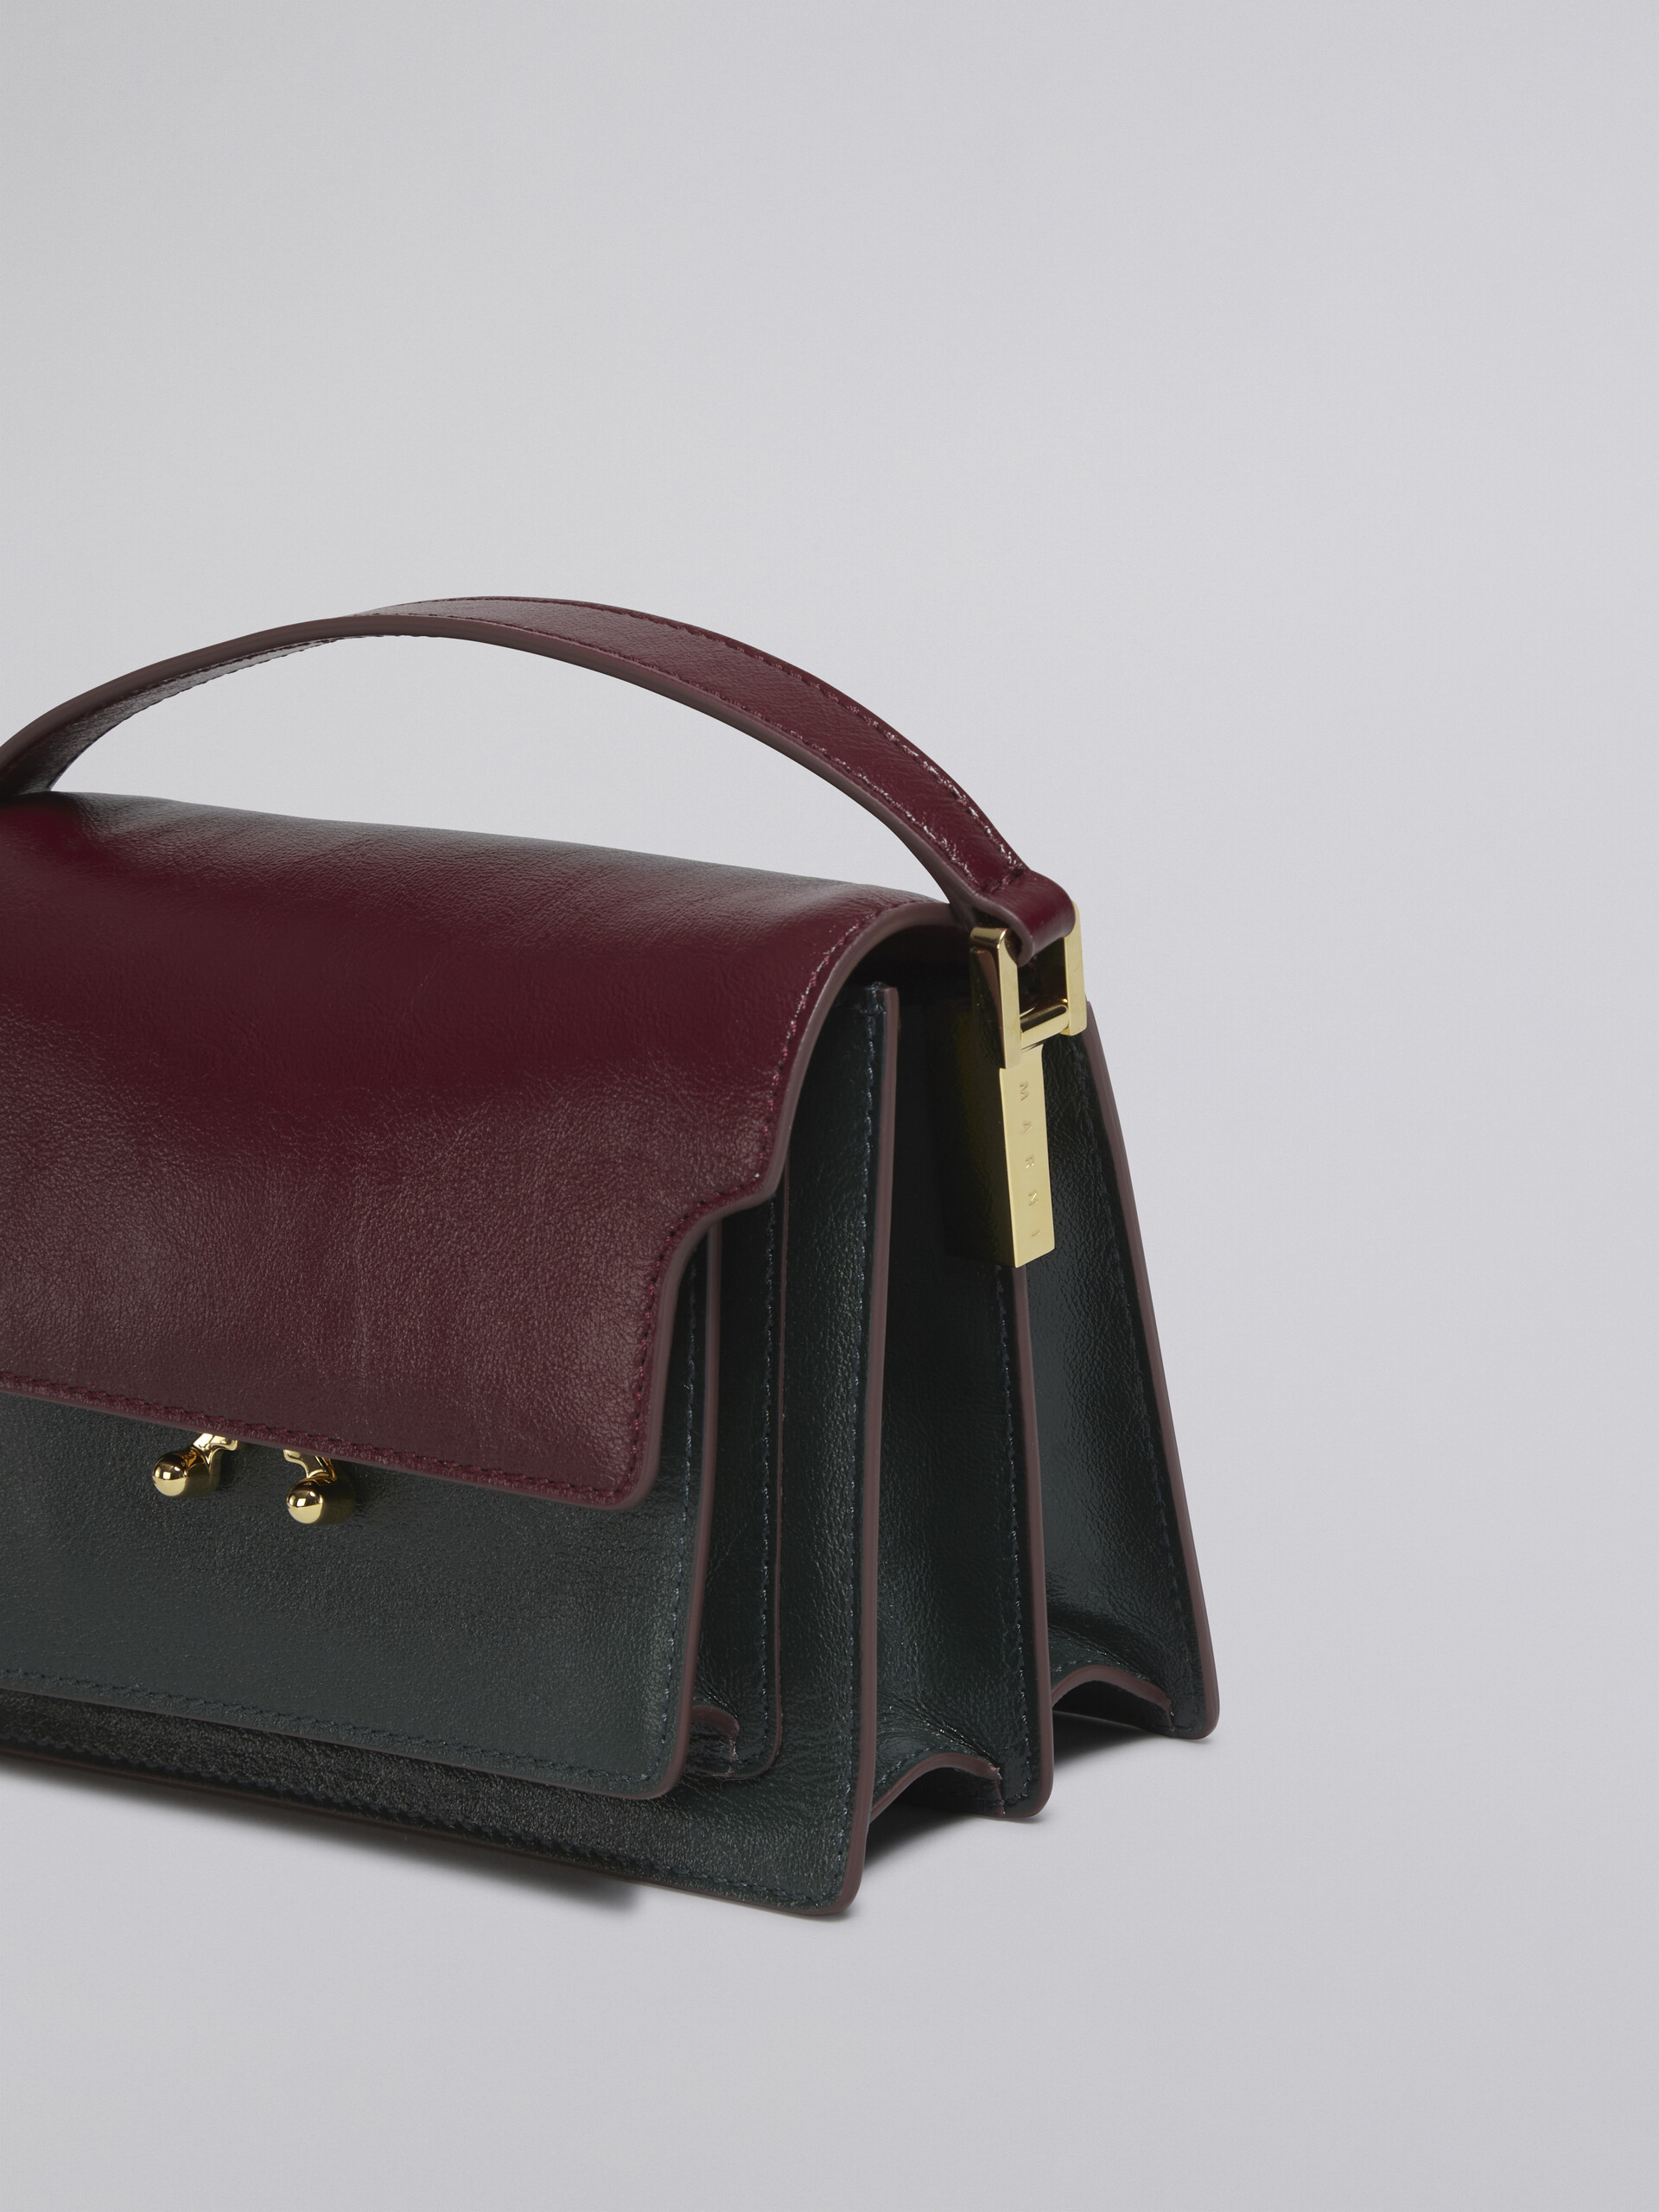 TRUNK SOFT bag in green and burgundy tumbled calf - Shoulder Bags - Image 3